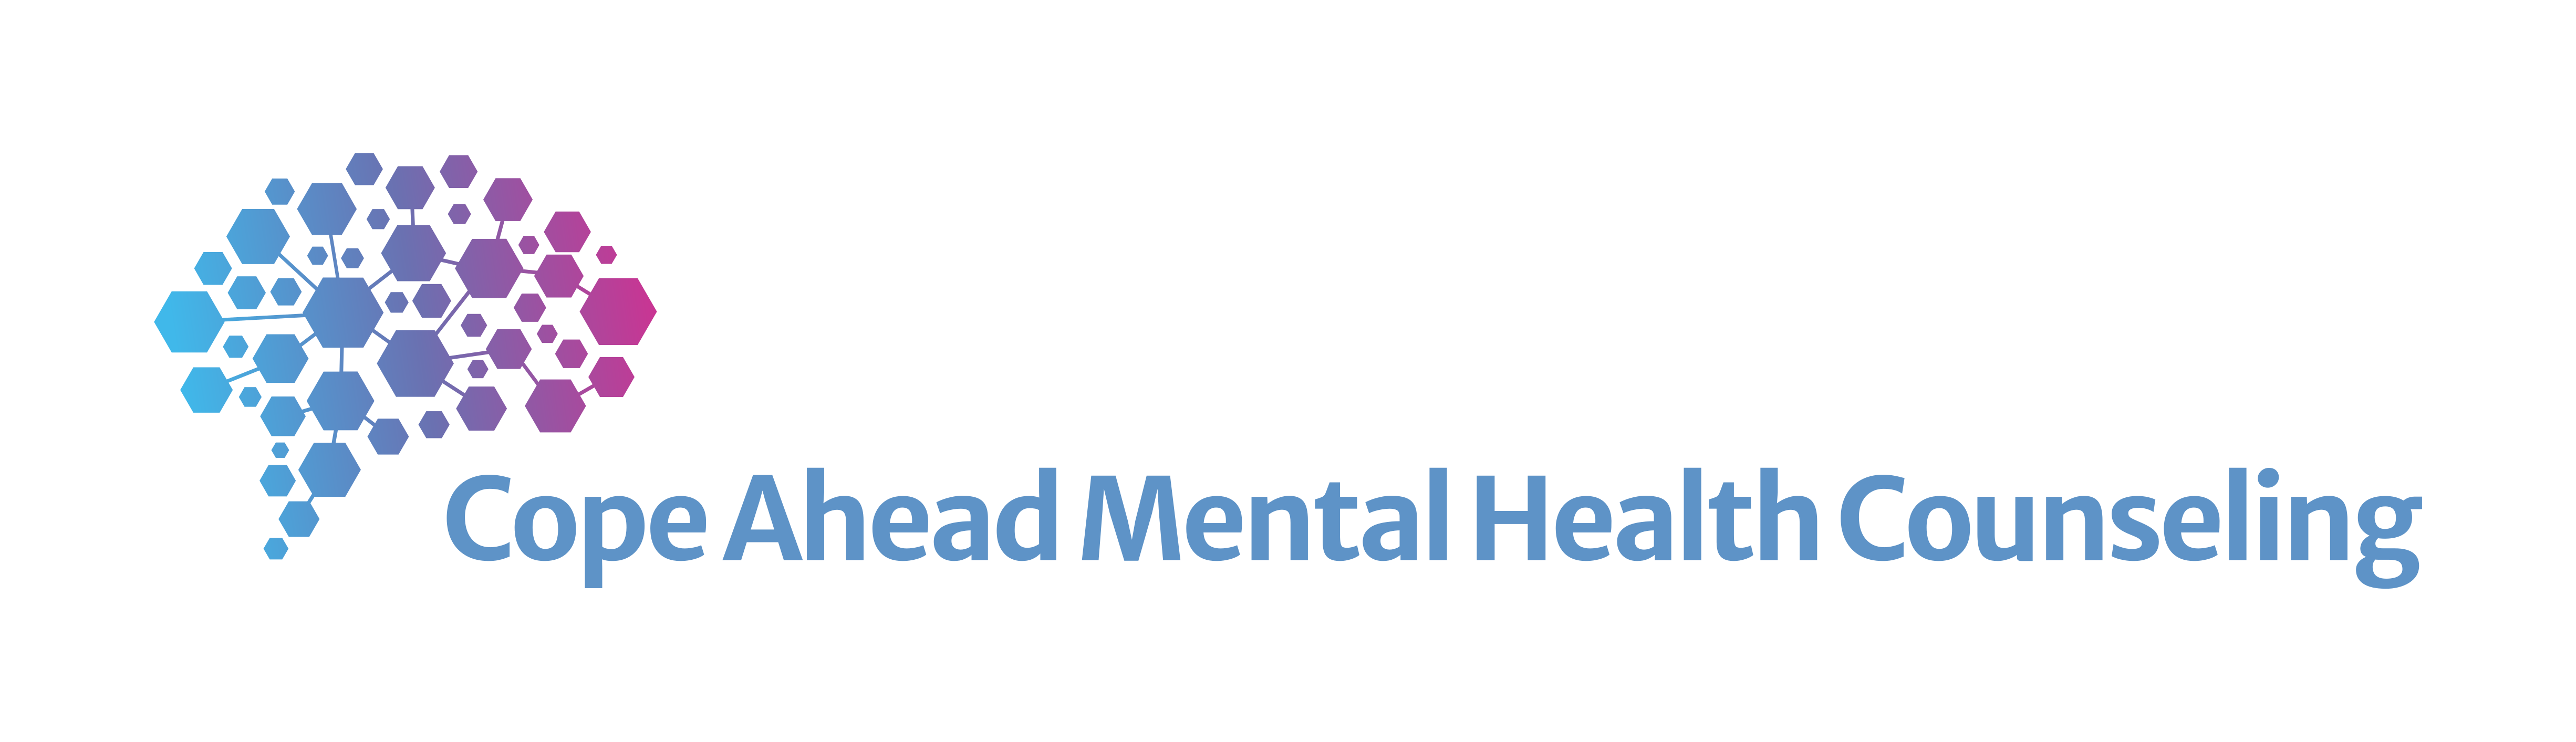 Cope Ahead Mental Health Counseling